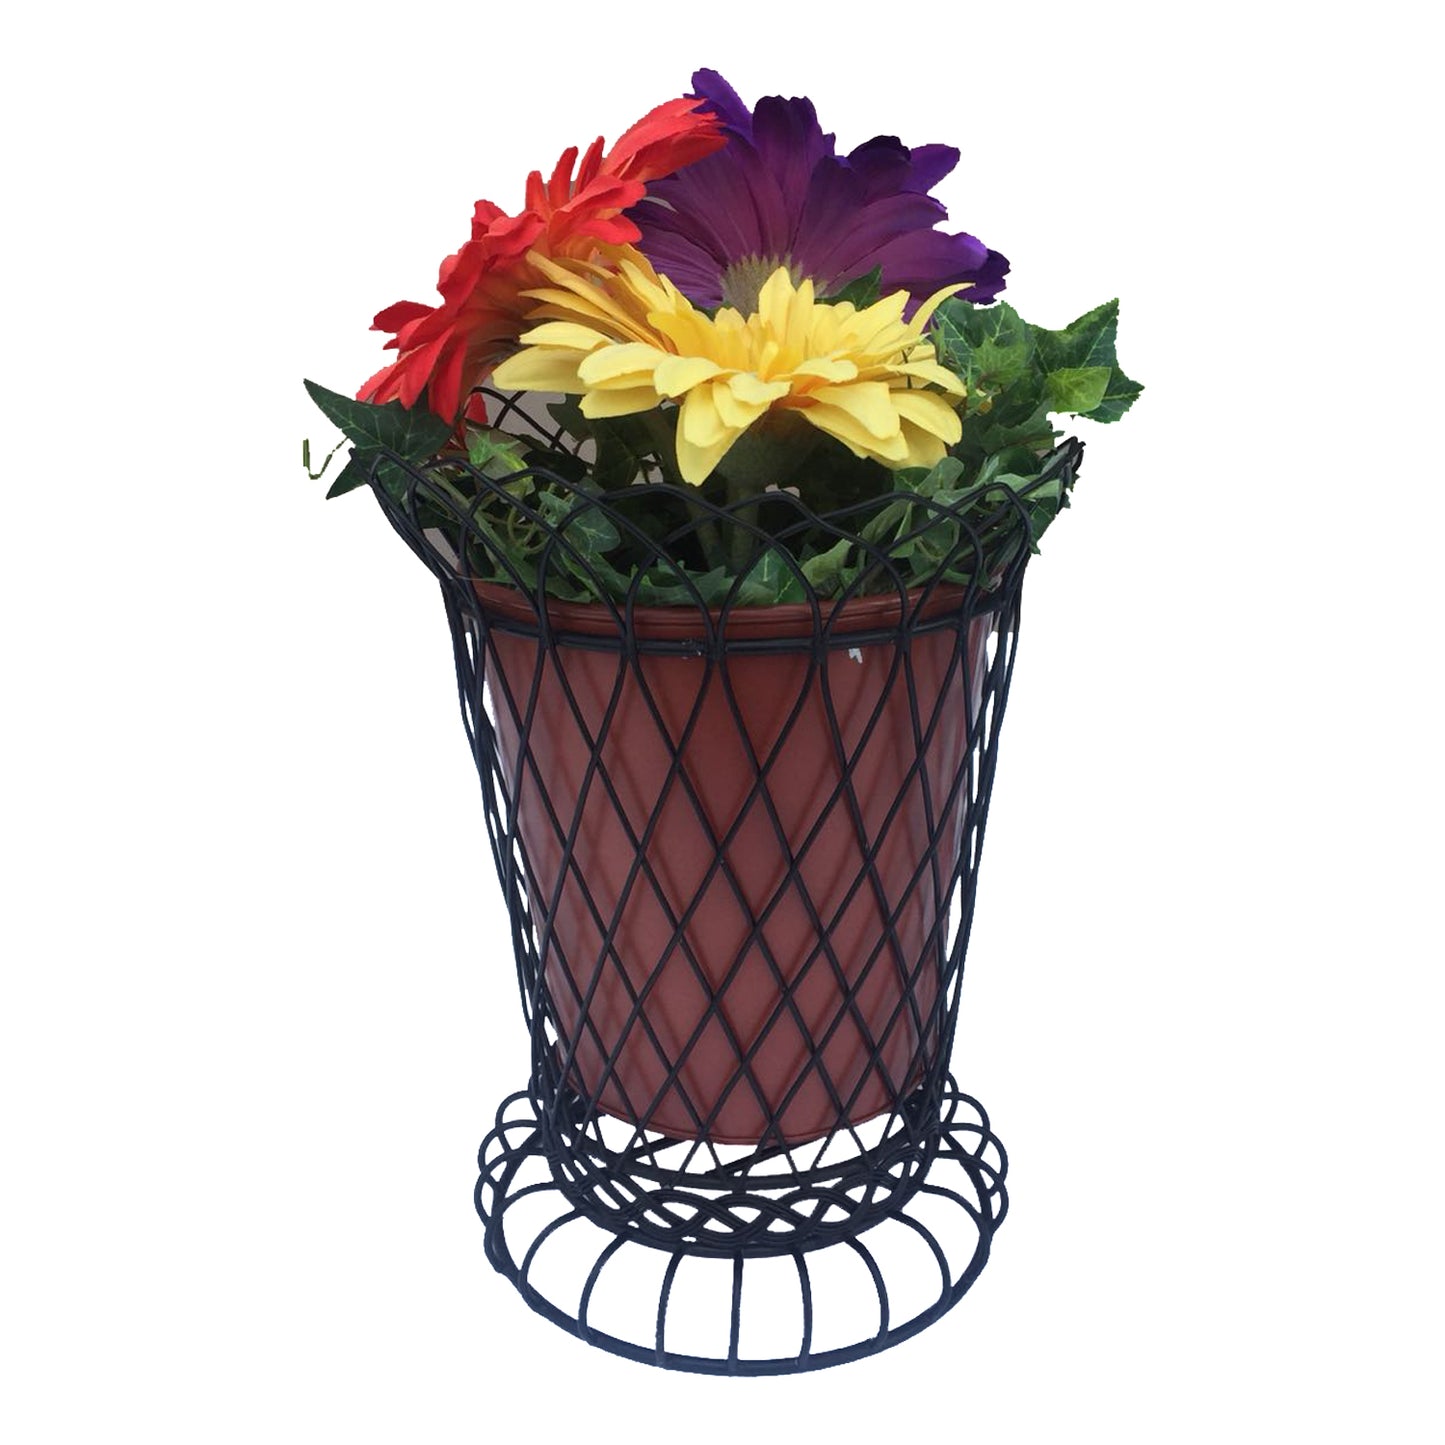 GiftBay 807-BR Tall Wire & Pot Black & Red Container / Vase 11" High. Very Unique and Strongly Built for Multi- Purpose Use